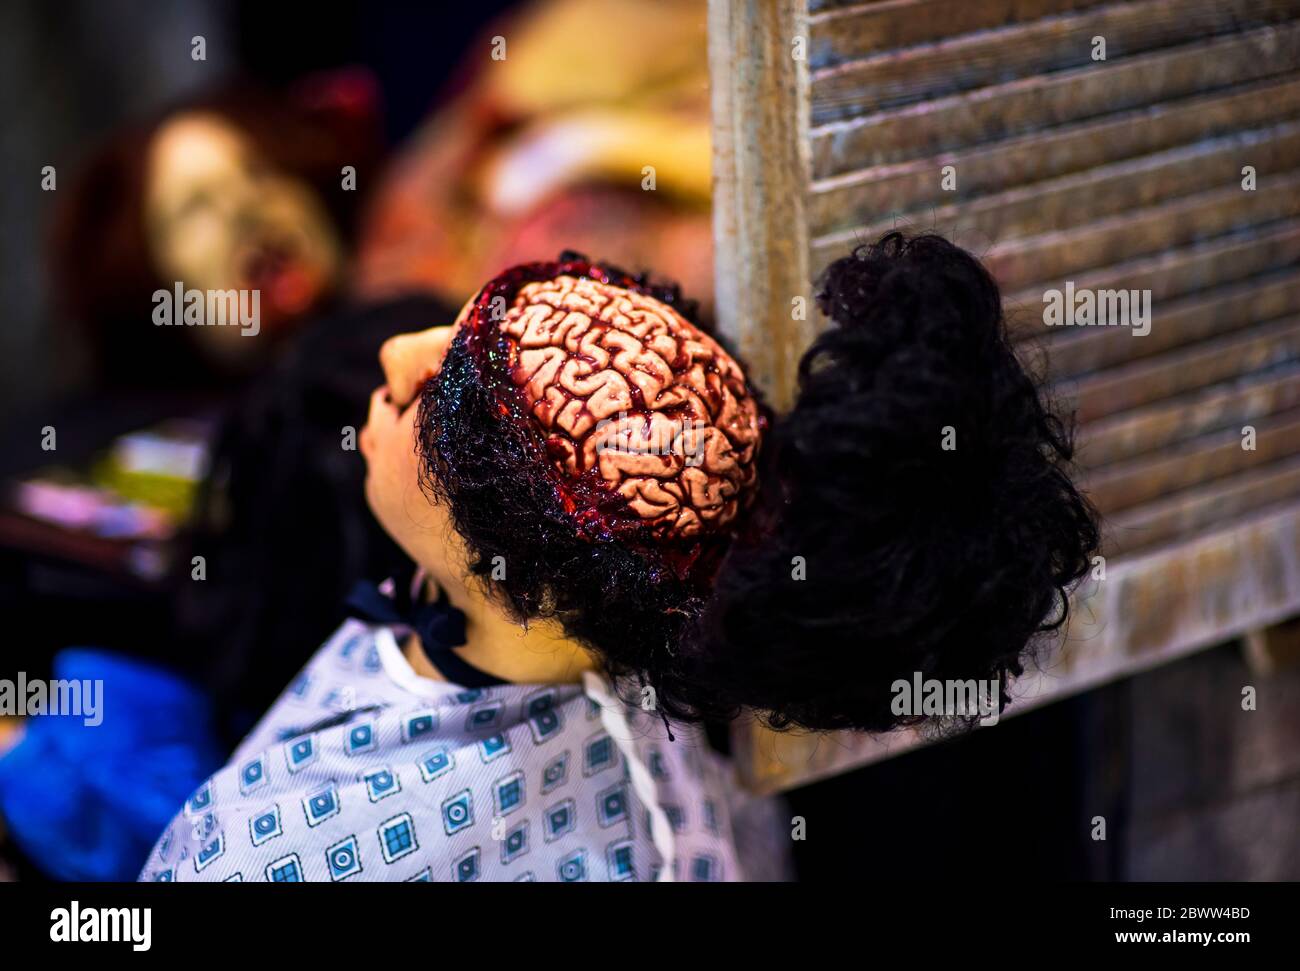 Brain surgery pavilion of fear, House of Horror Stock Photo